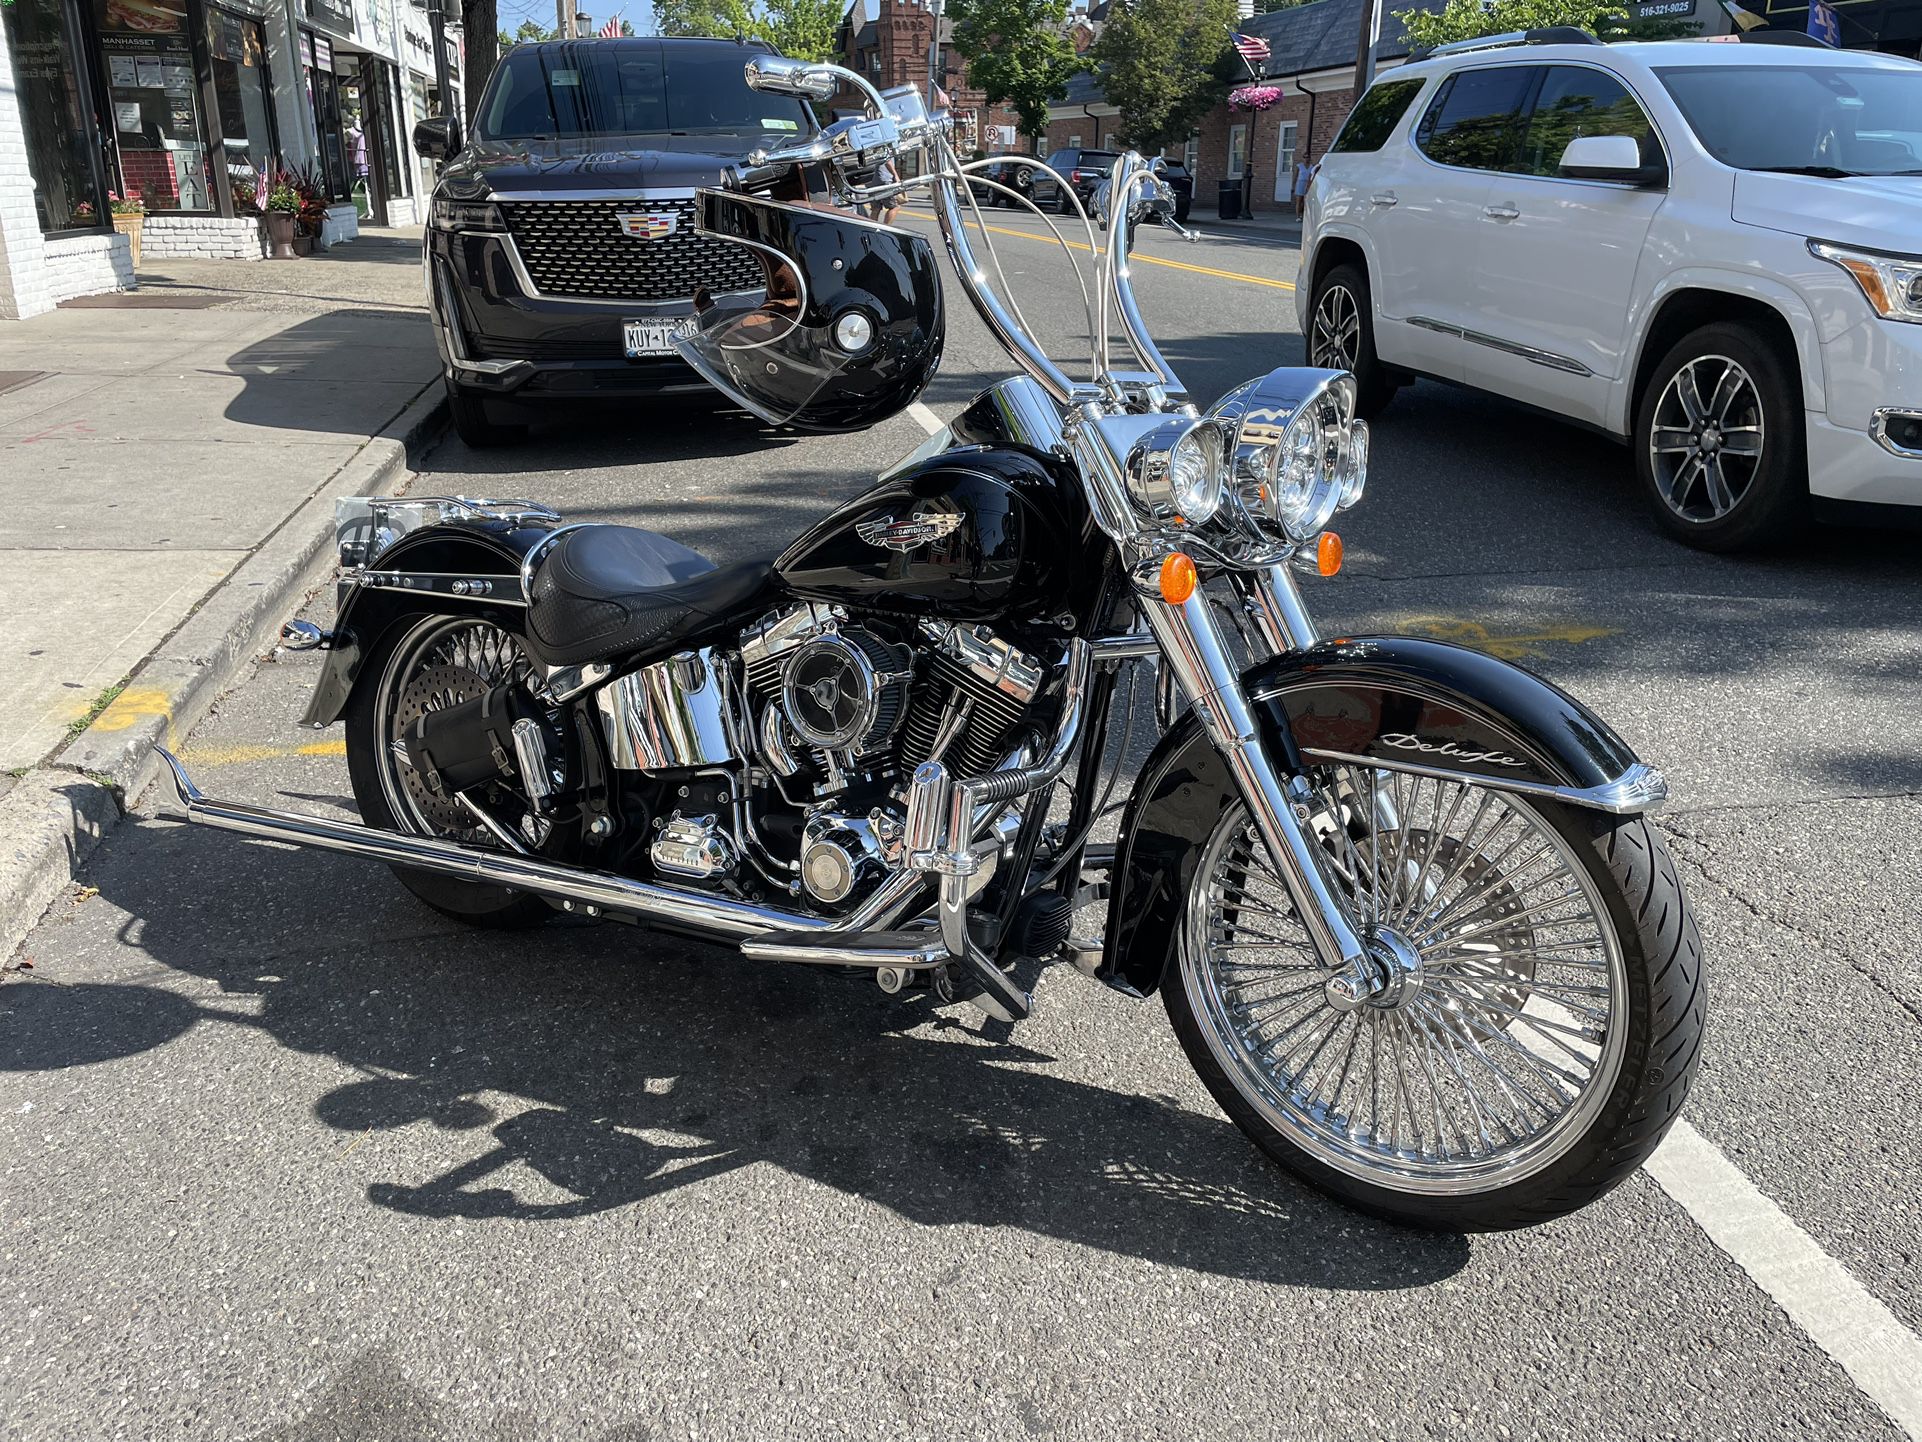 Softail Deluxe 